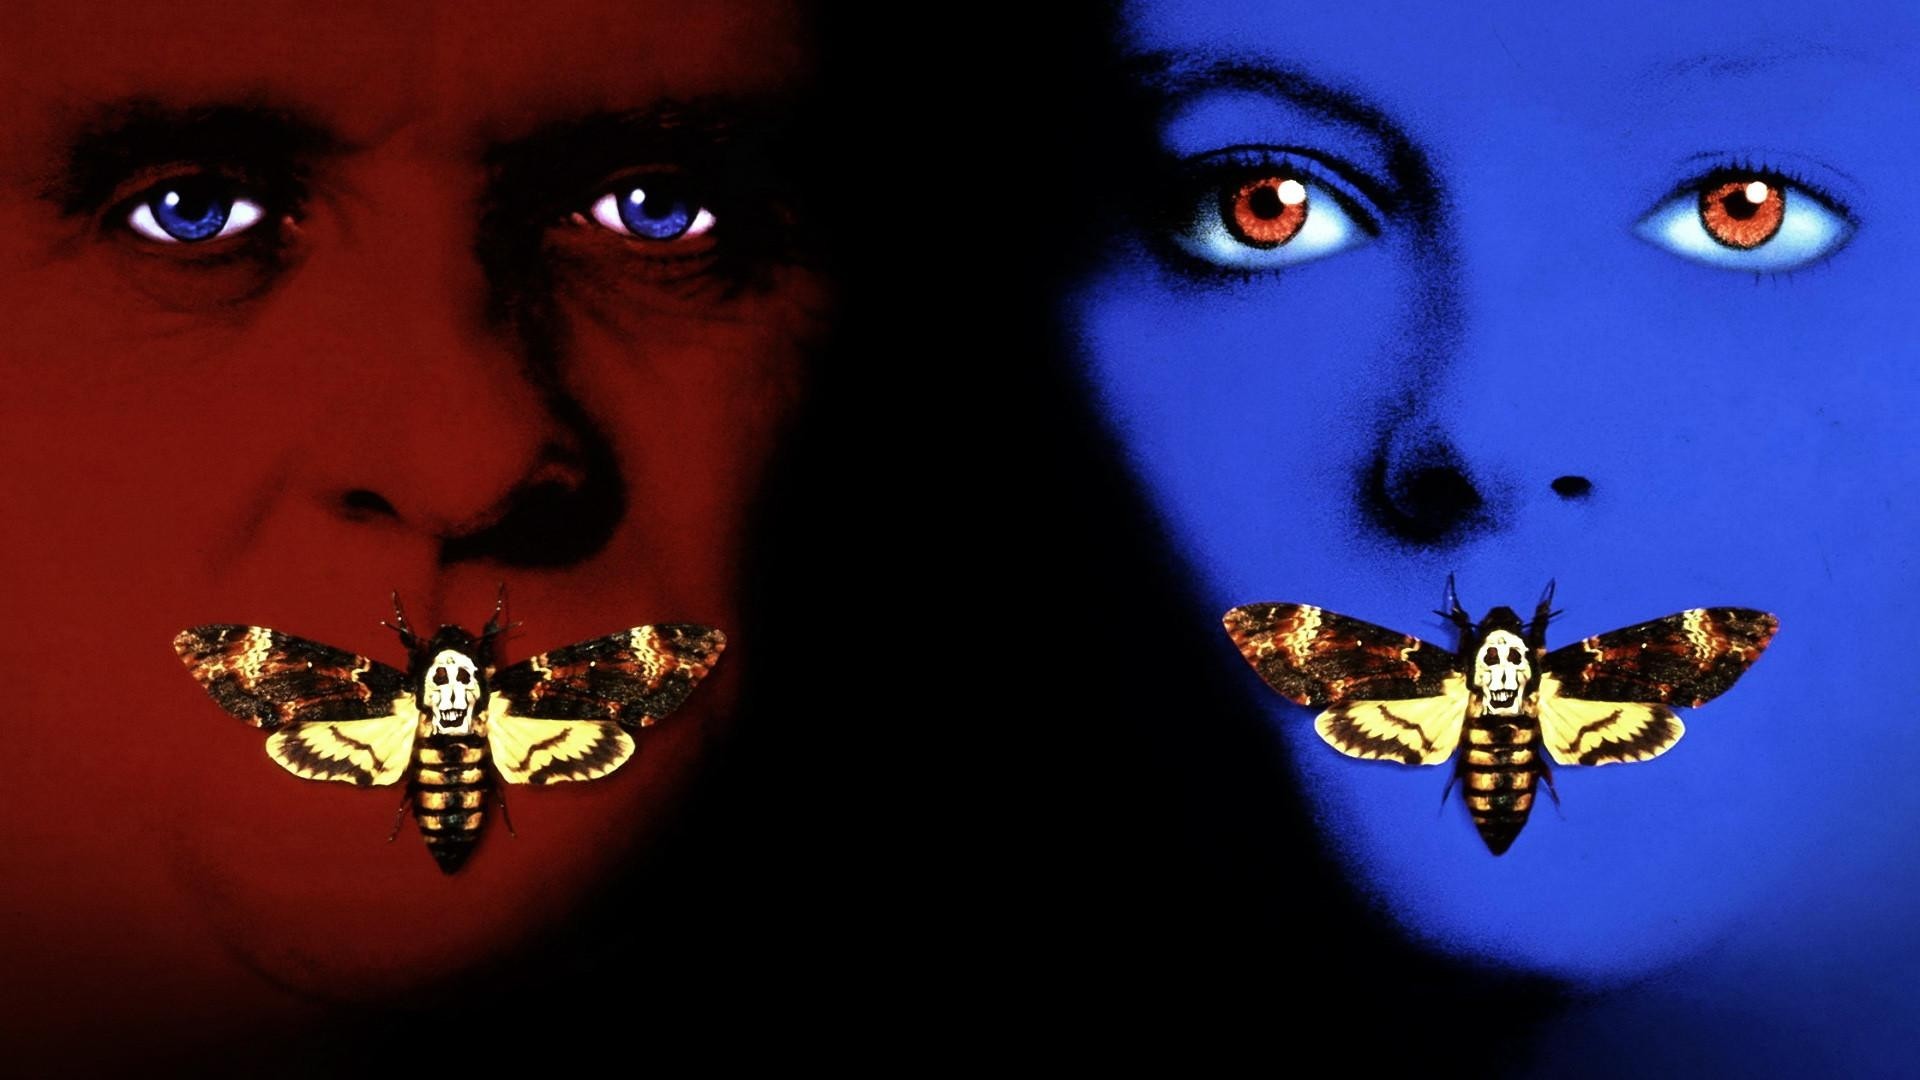 1920x1080 The Silence Of The Lambs Wallpaper 13 - 1920 X 1080